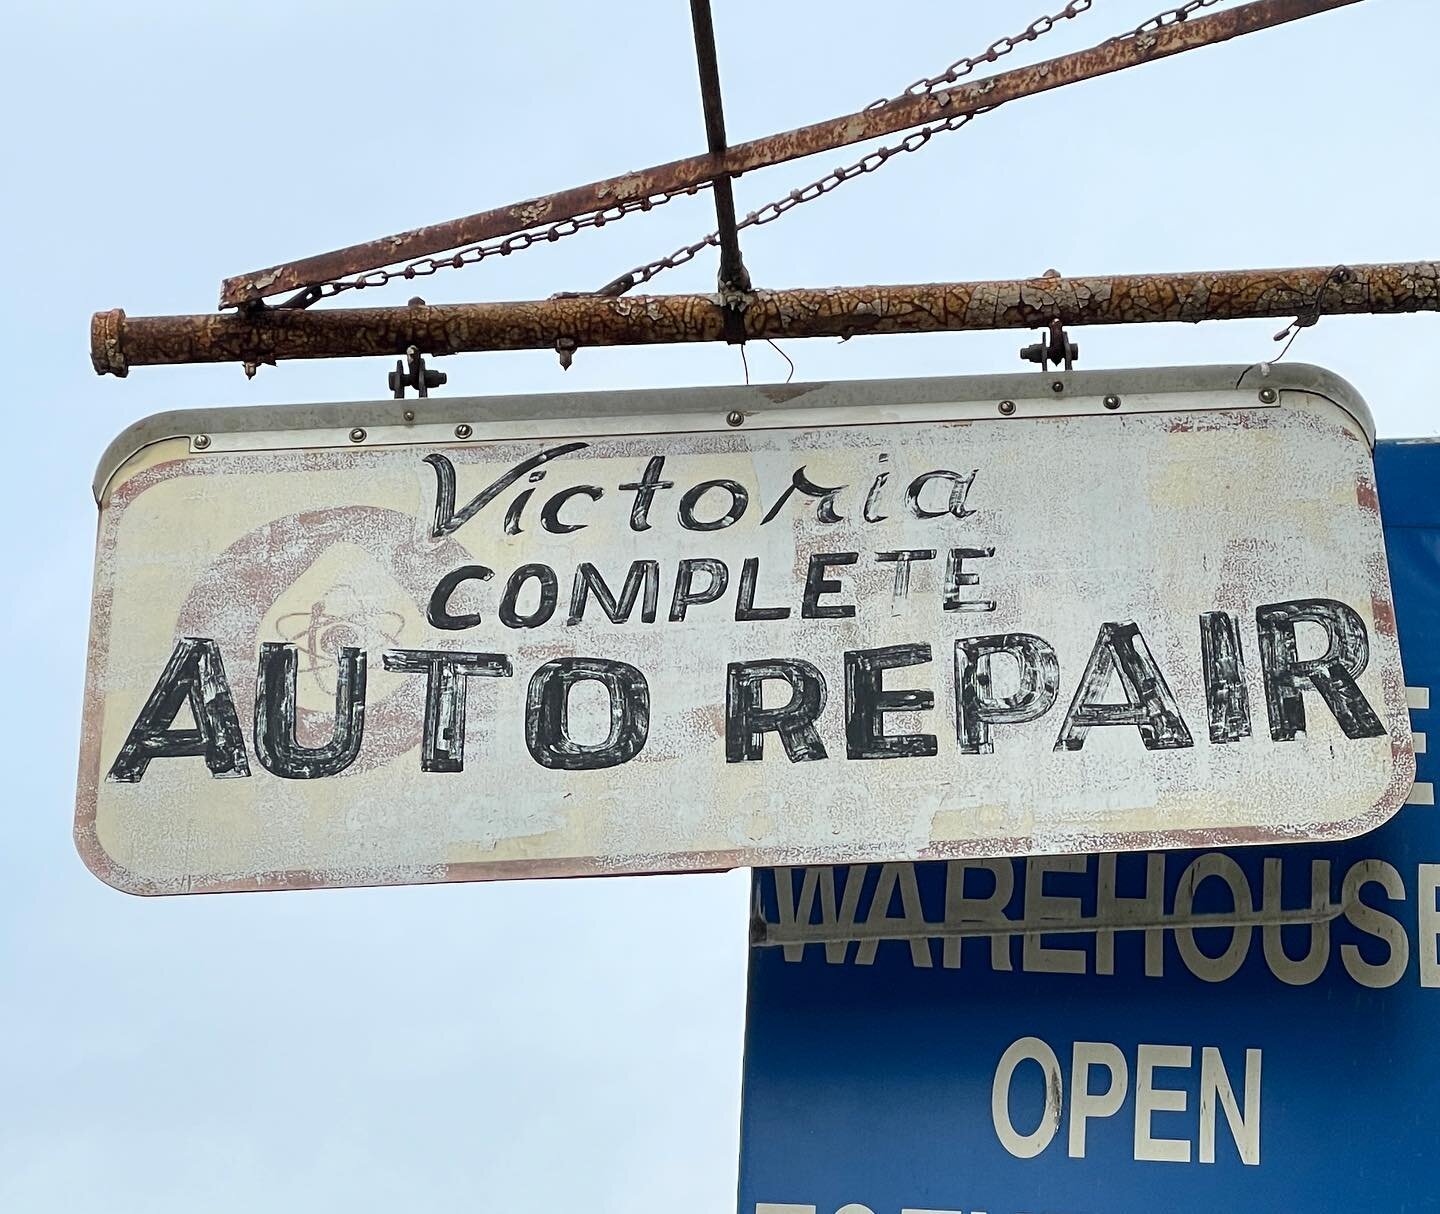 Continuing adventures in the auto repair district.
#signspotting #handpainted #signage #typevstime